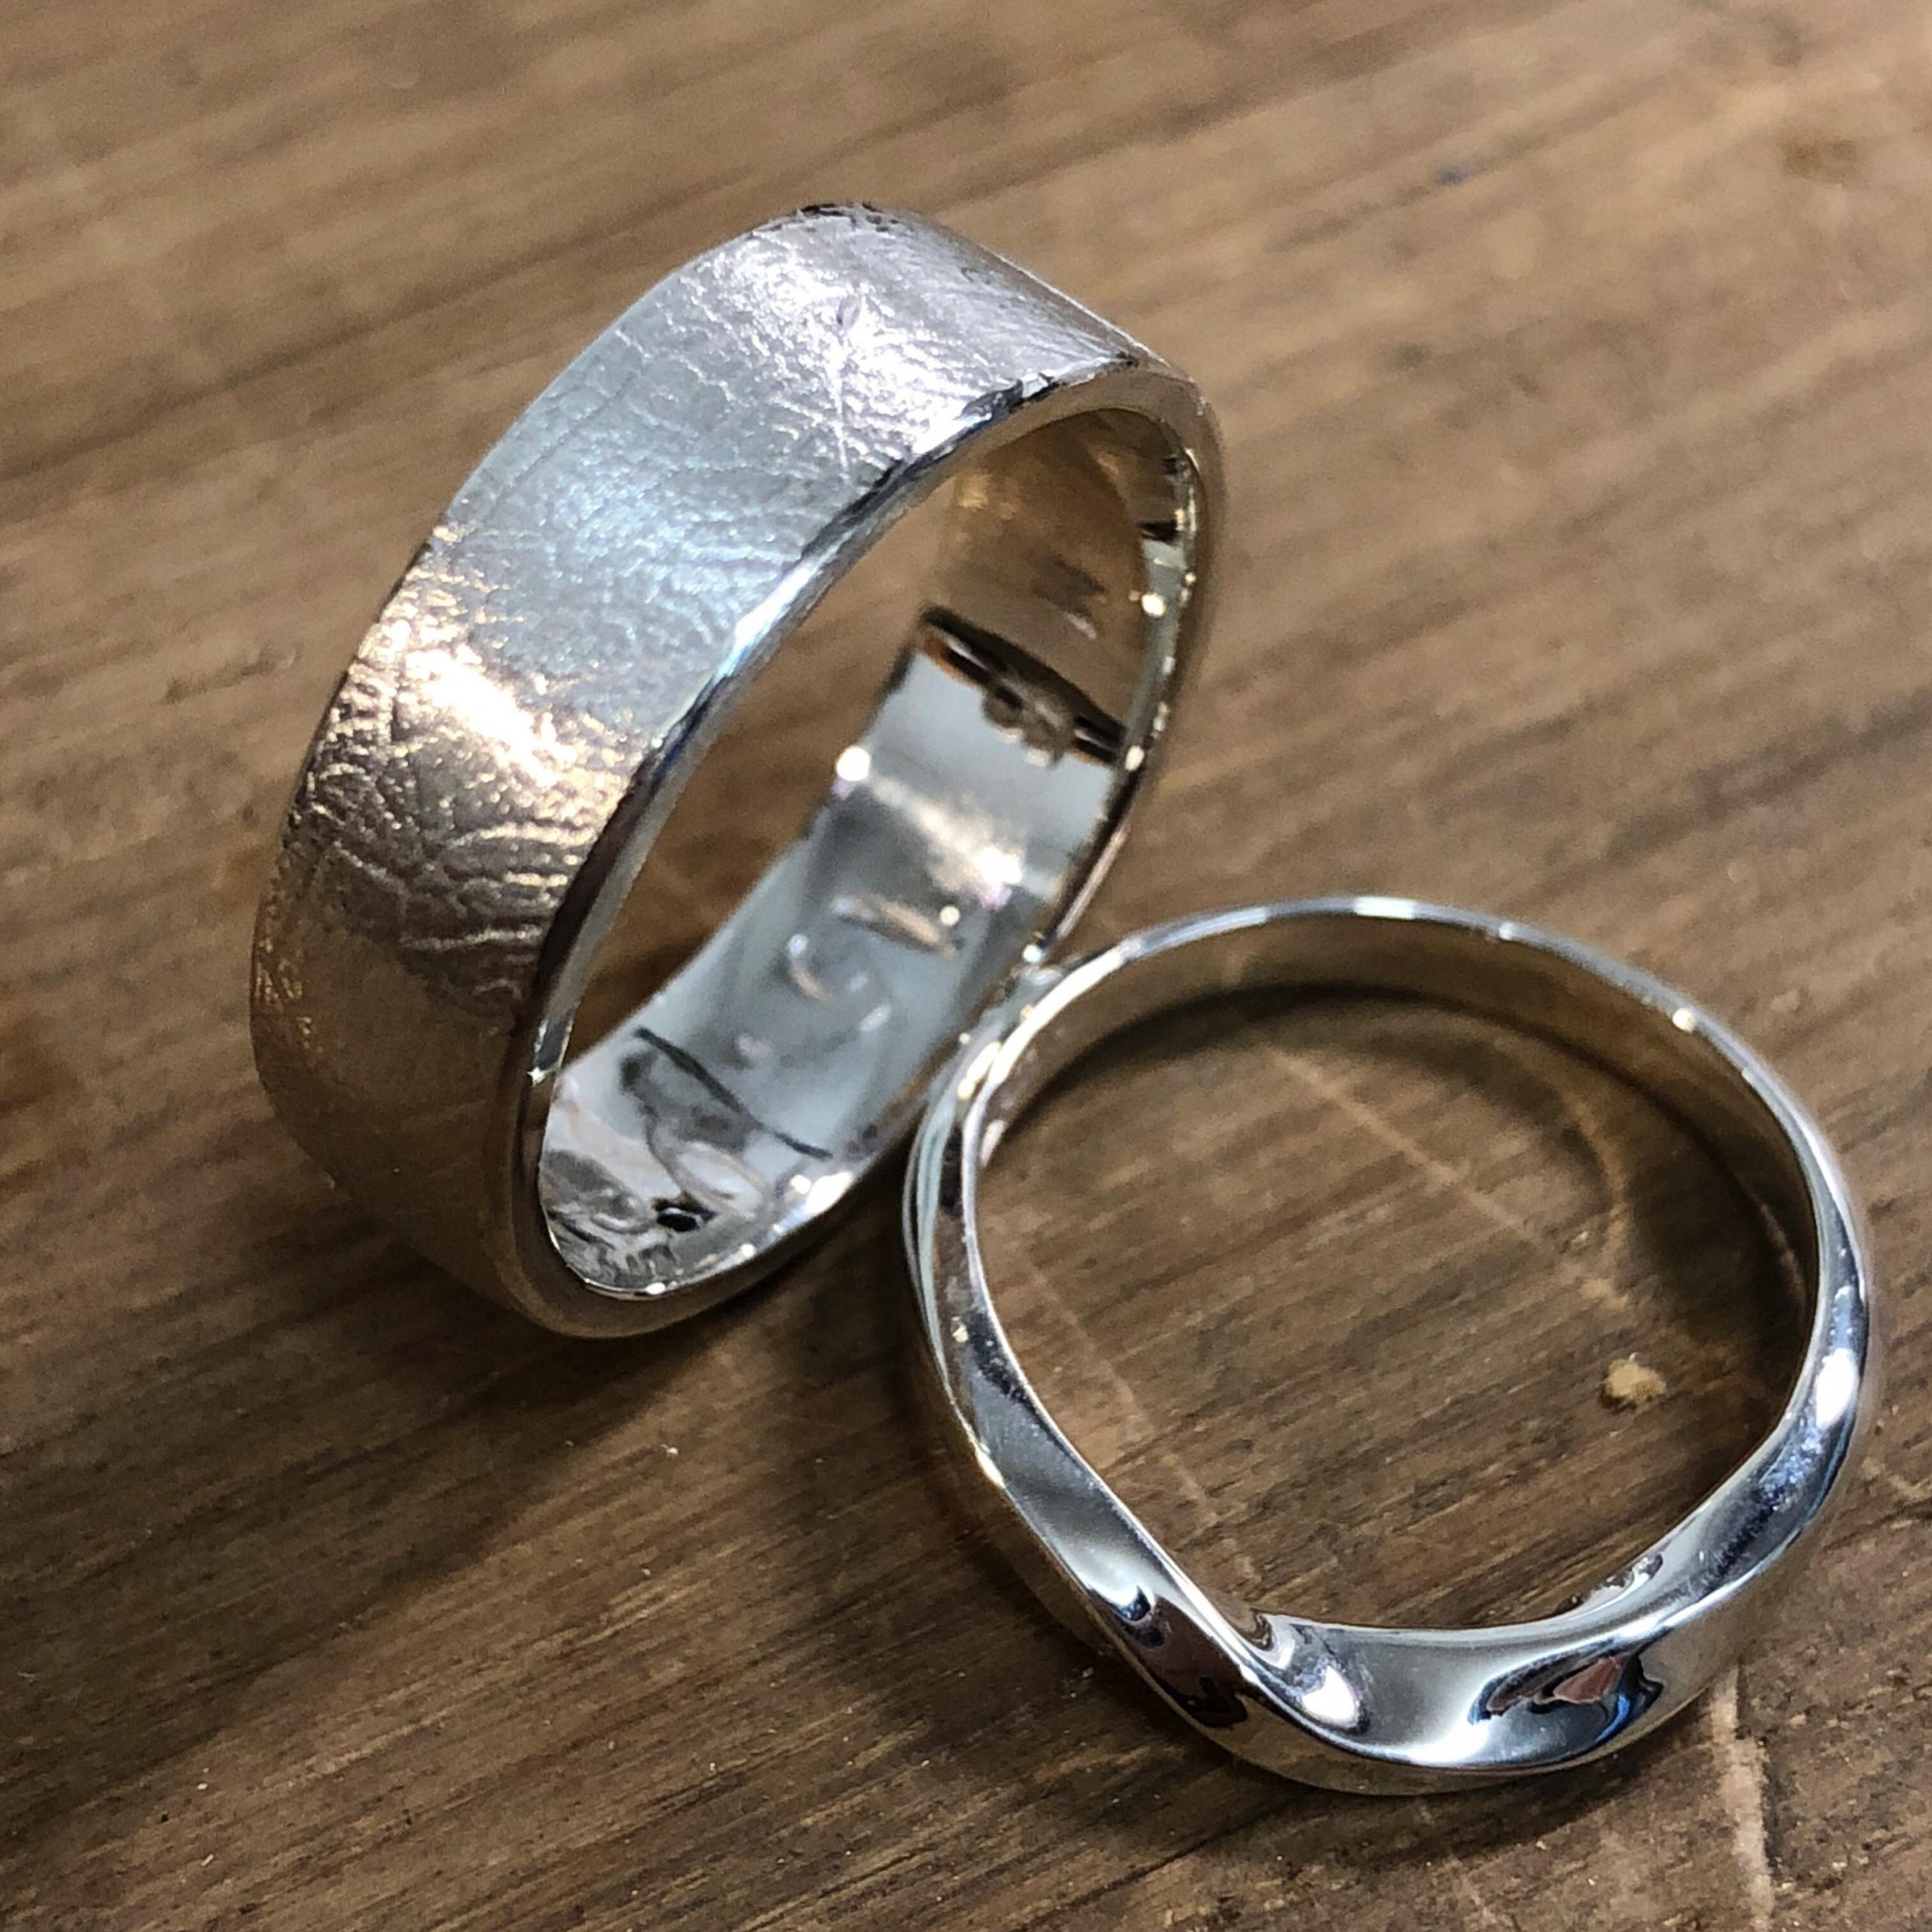 Make Your Own Wedding Ring
 Make Your Own Wedding Rings Experience Day For Two